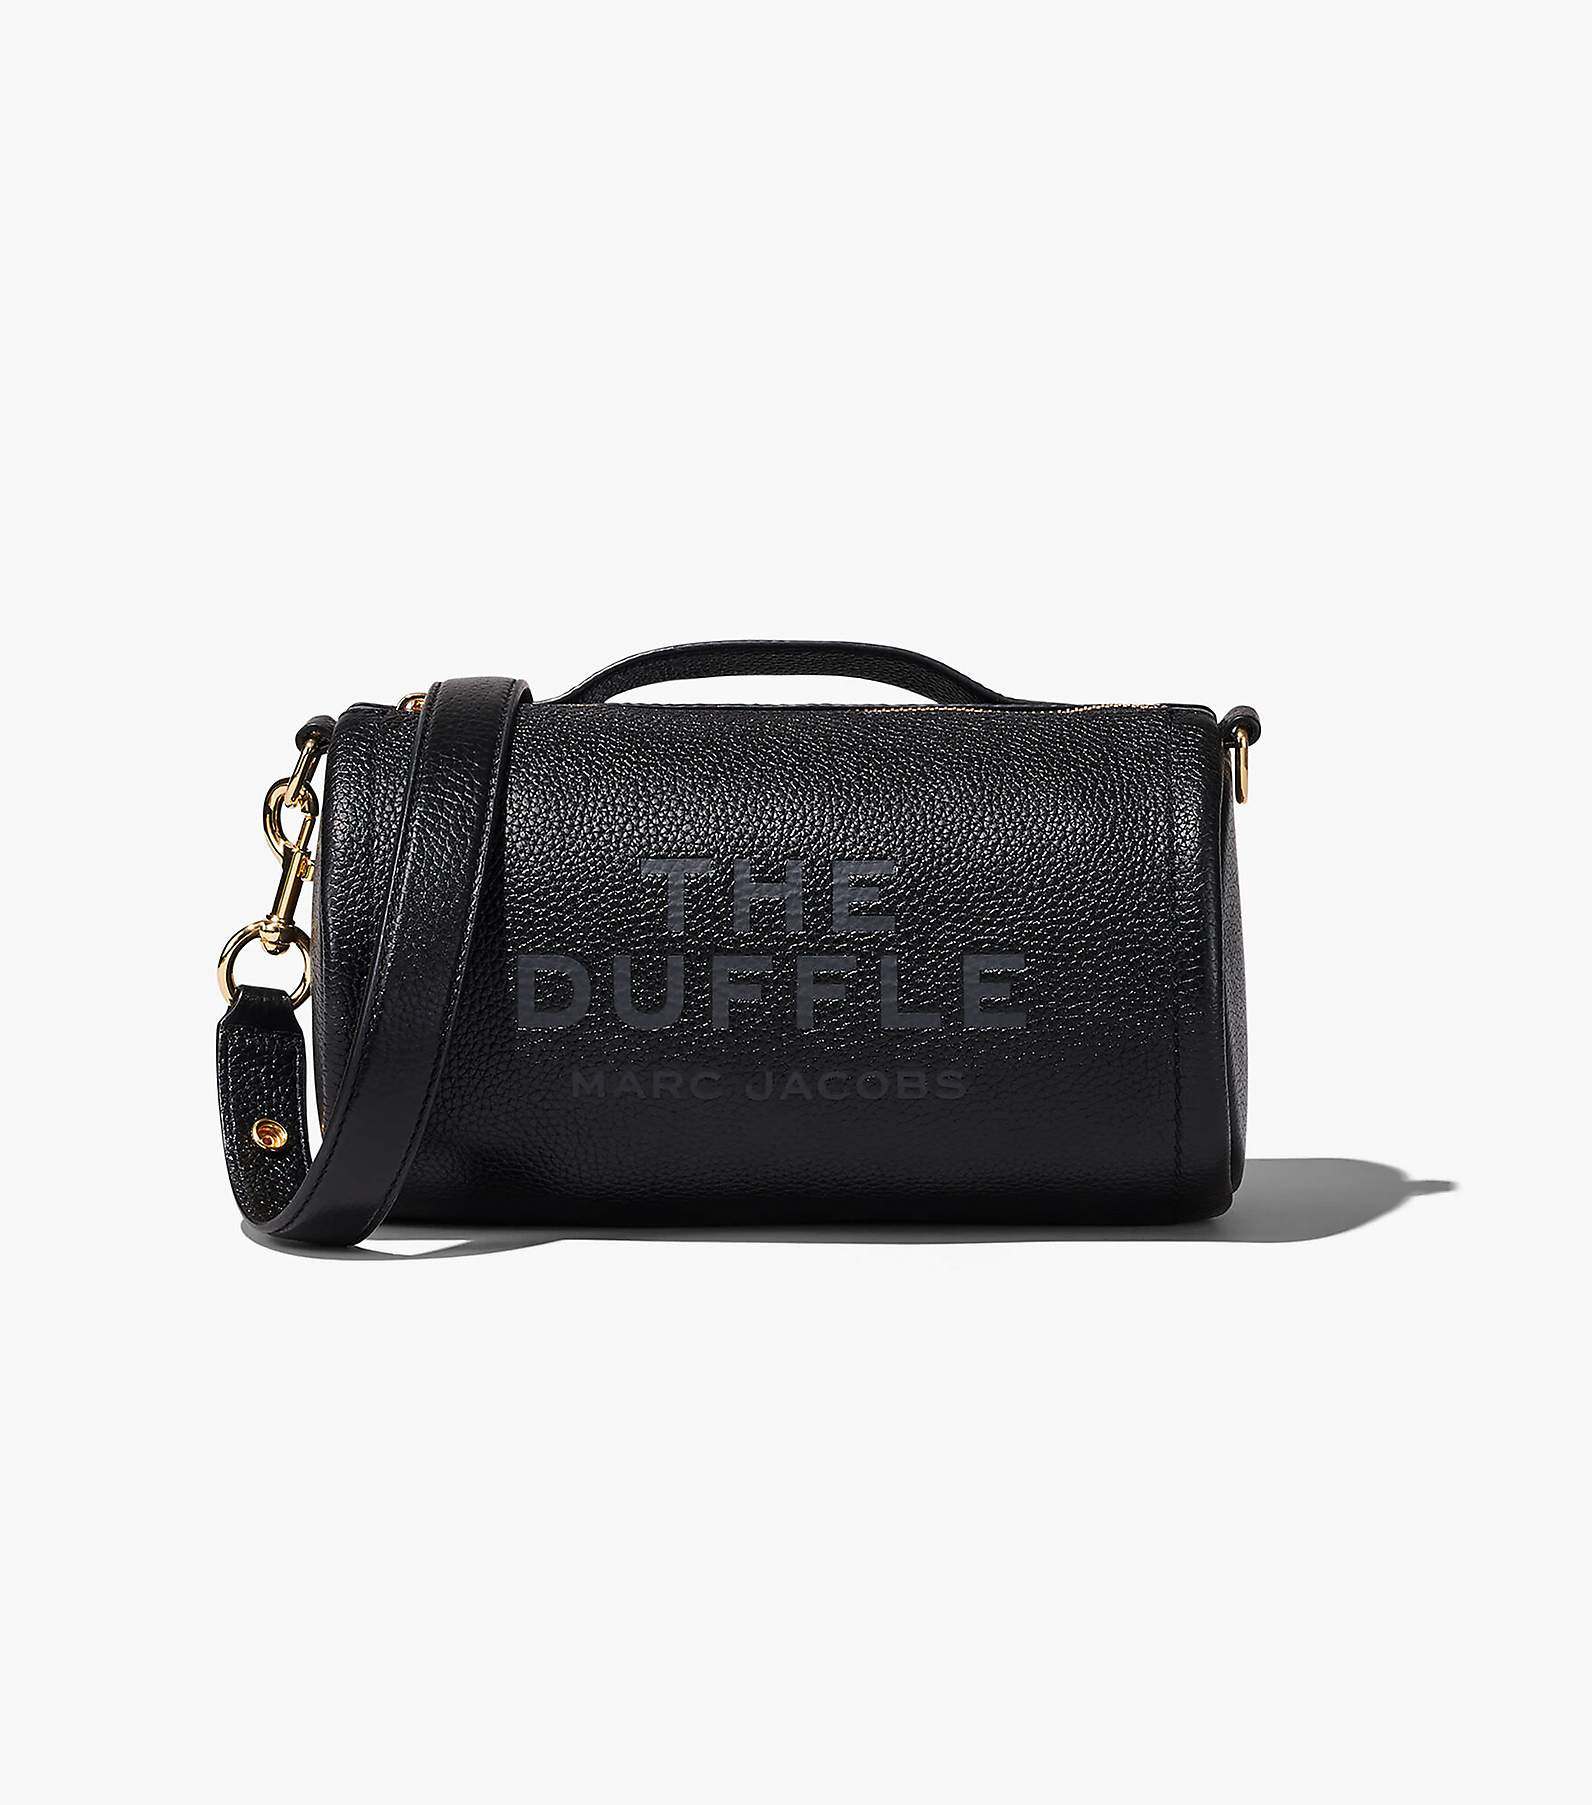 Real or fake Burberry Black Label bag? Seller is selling this